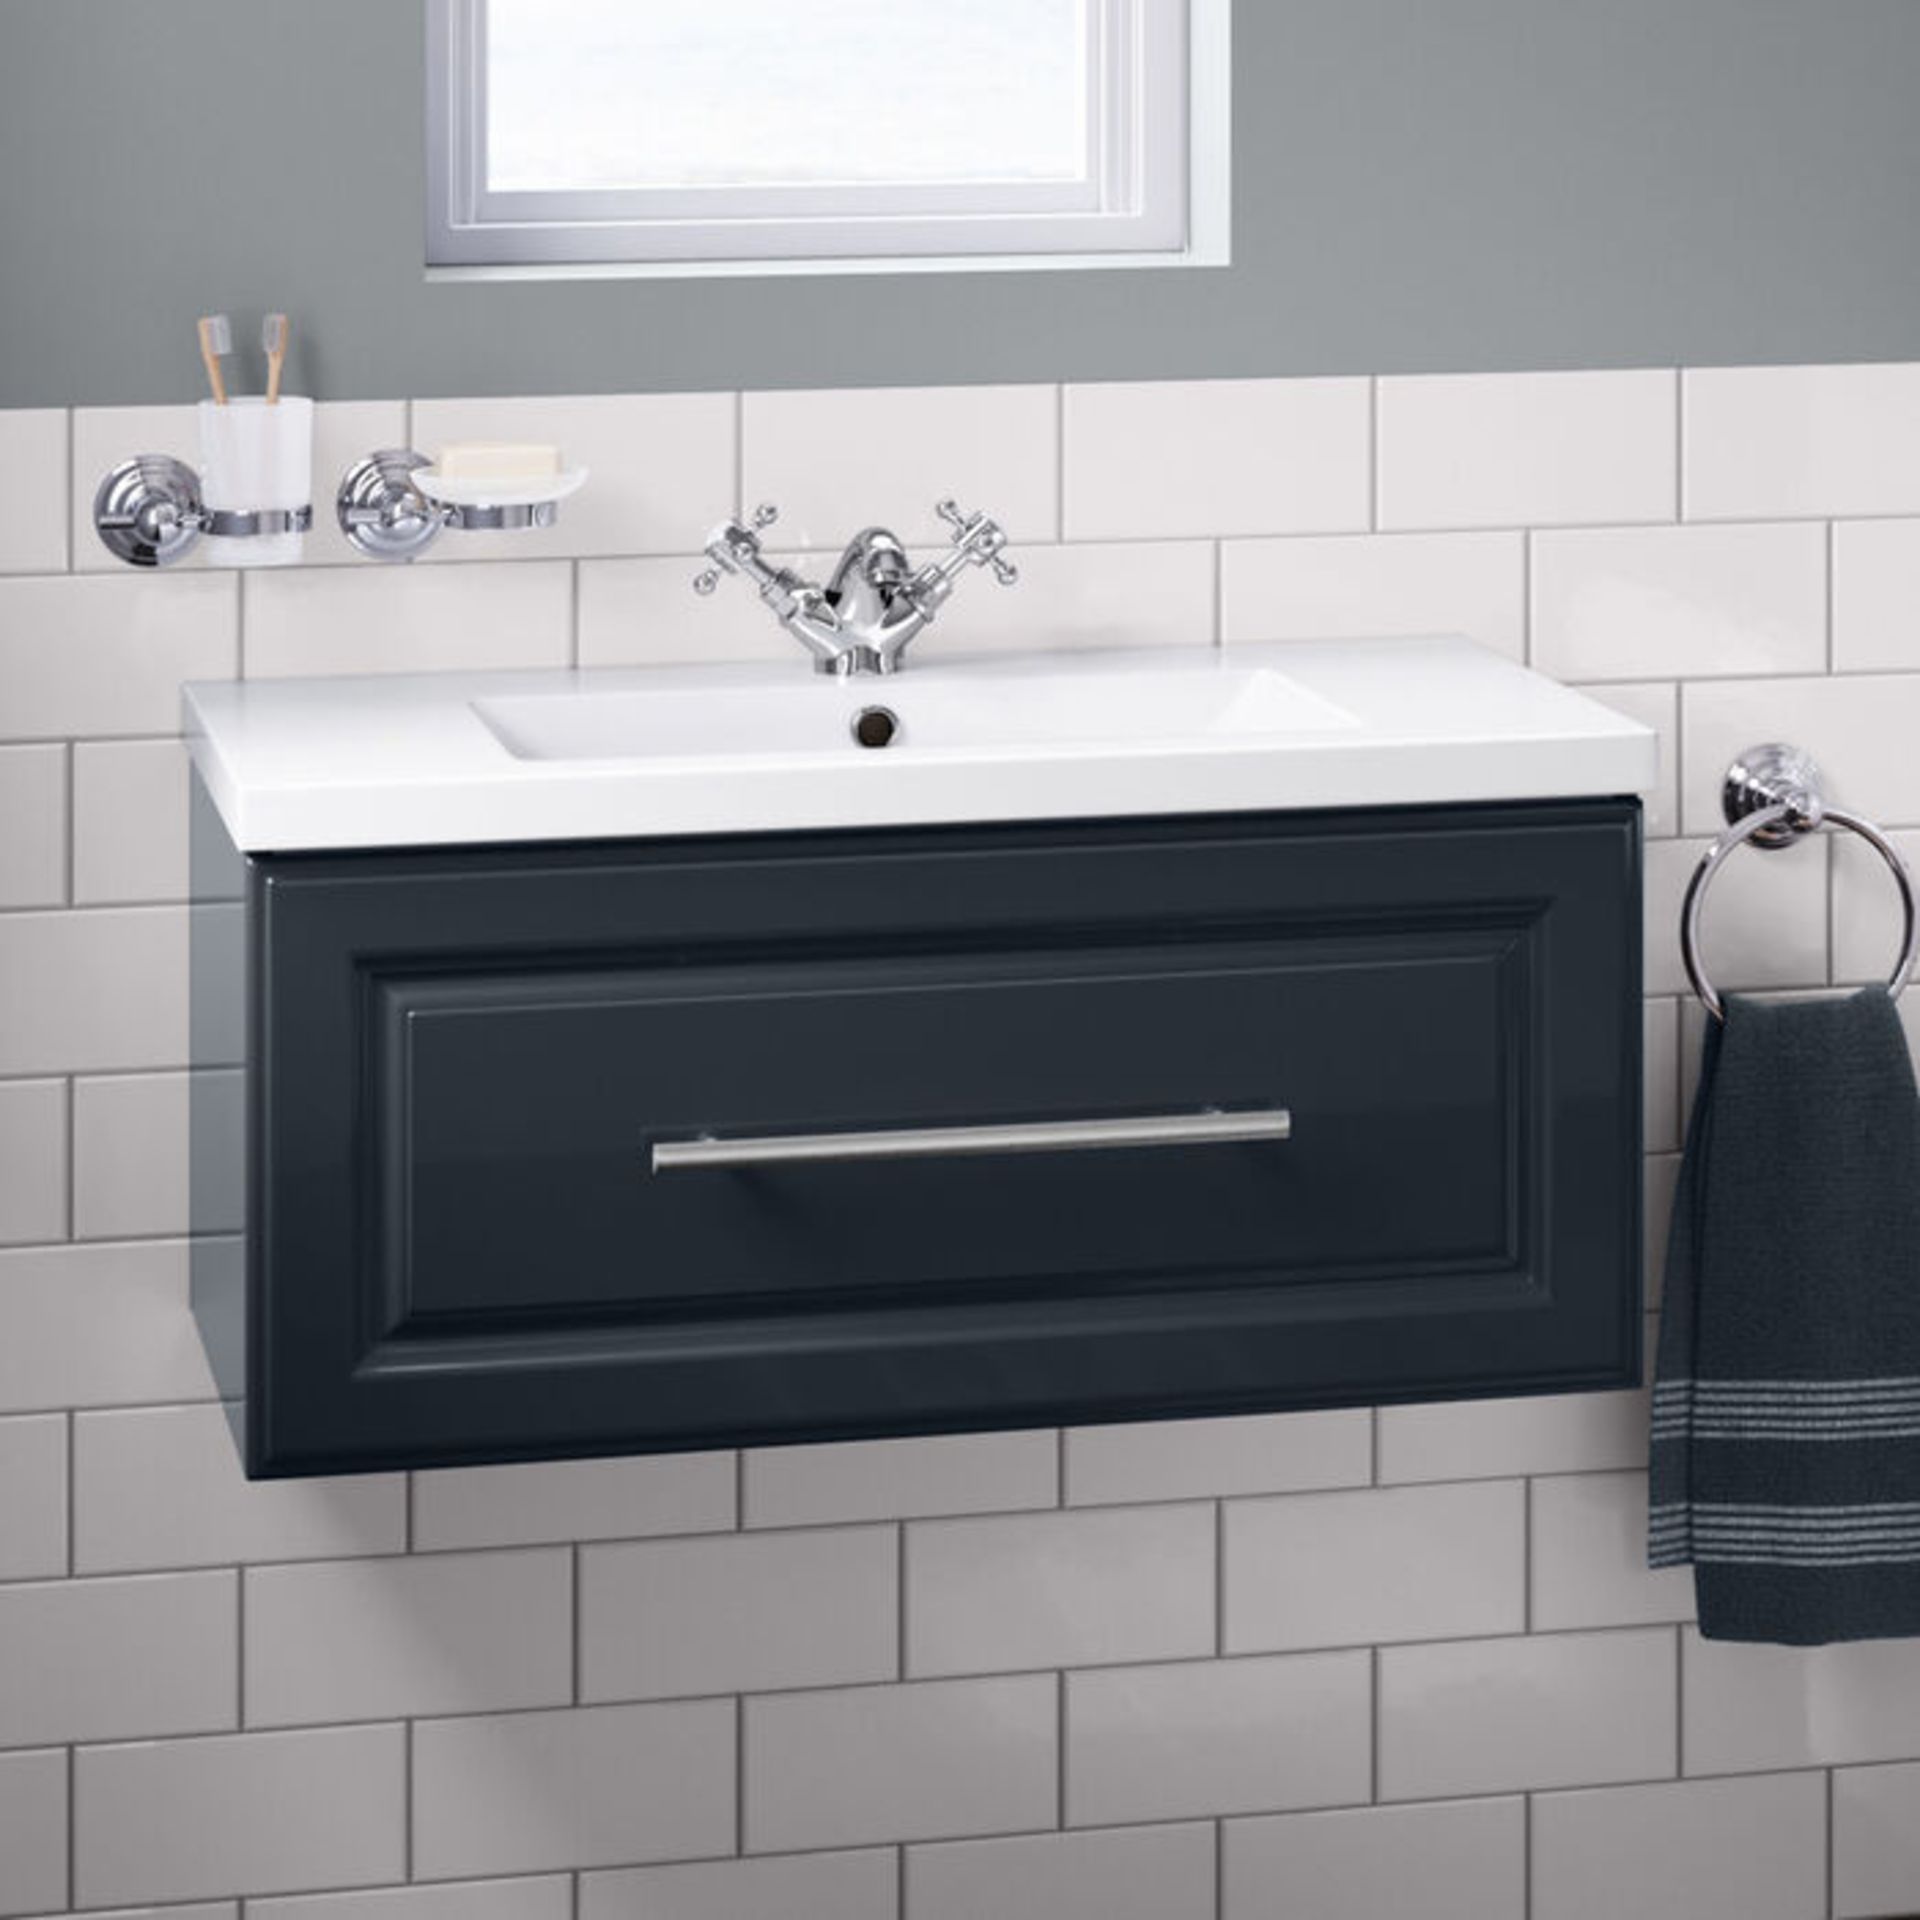 (RK5) 800mm Arden Gloss Black Blue Vanity Unit - Wall Hung. RRP £499.99. Comes complete with b...